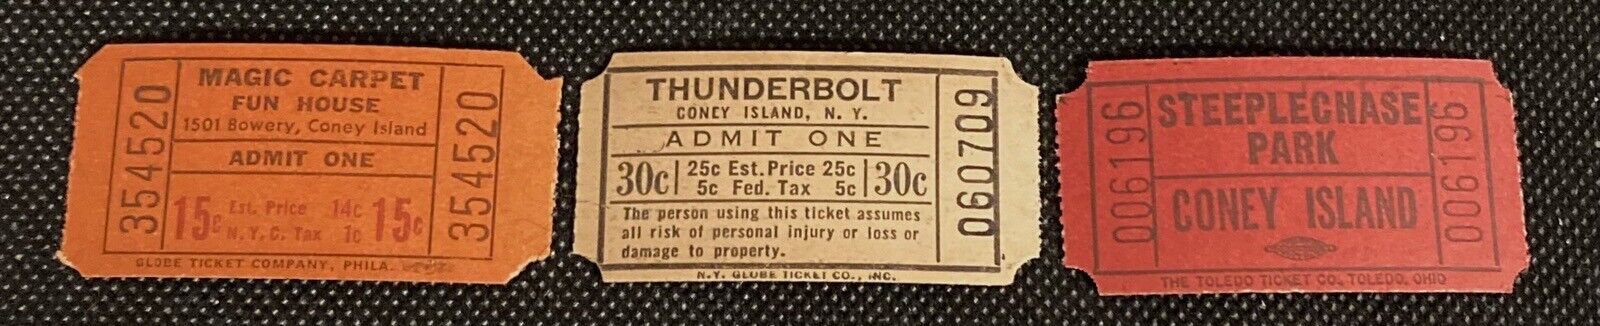 Coney Island Vintage Amusement Tickets Tickets Lot of 3 Different